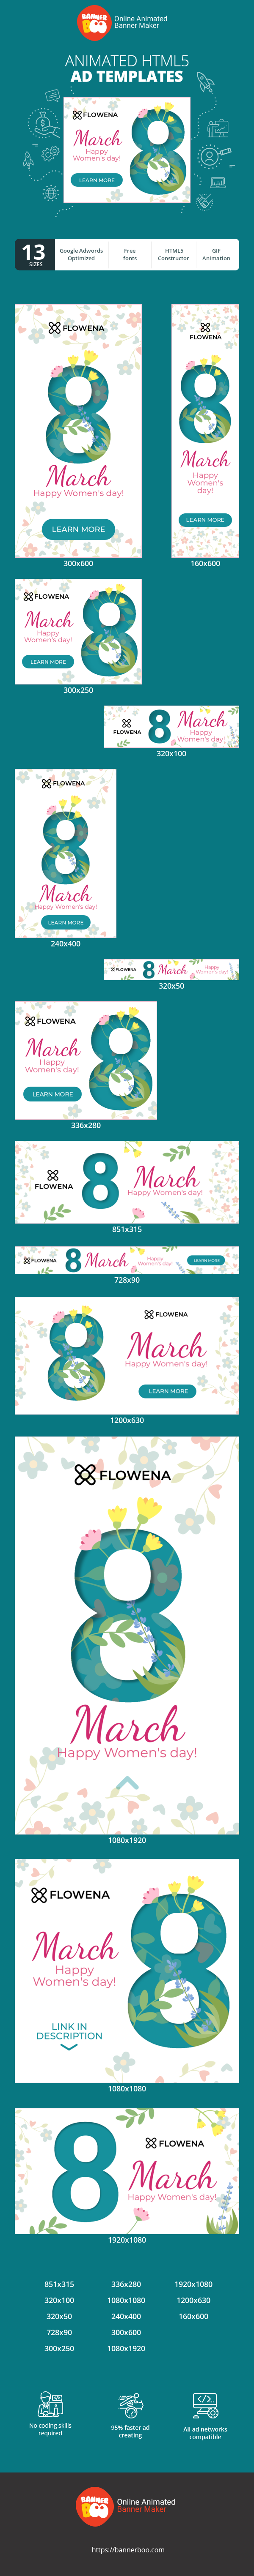 Banner ad template — 8 March — Happy Women's Day!